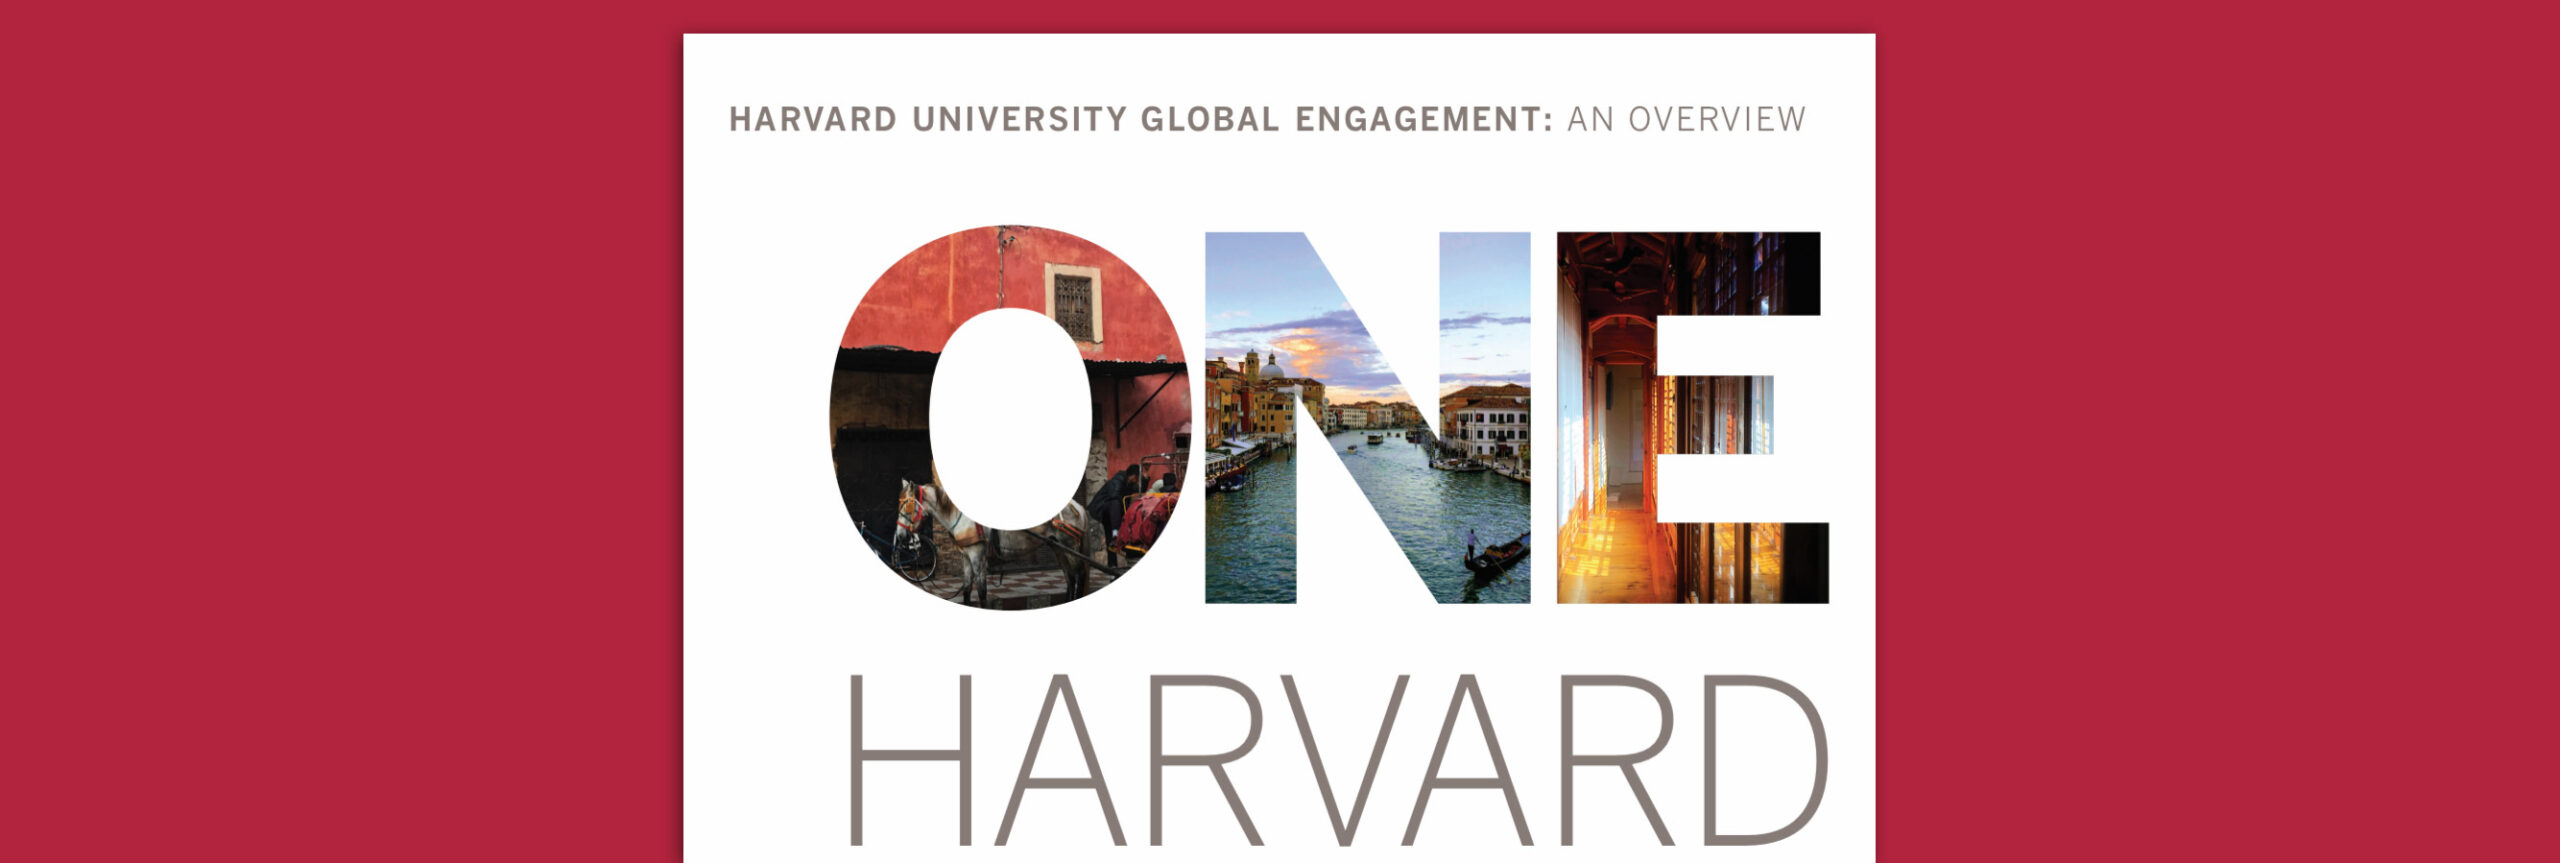 Harvard University Global Engagement: An Overview book cover